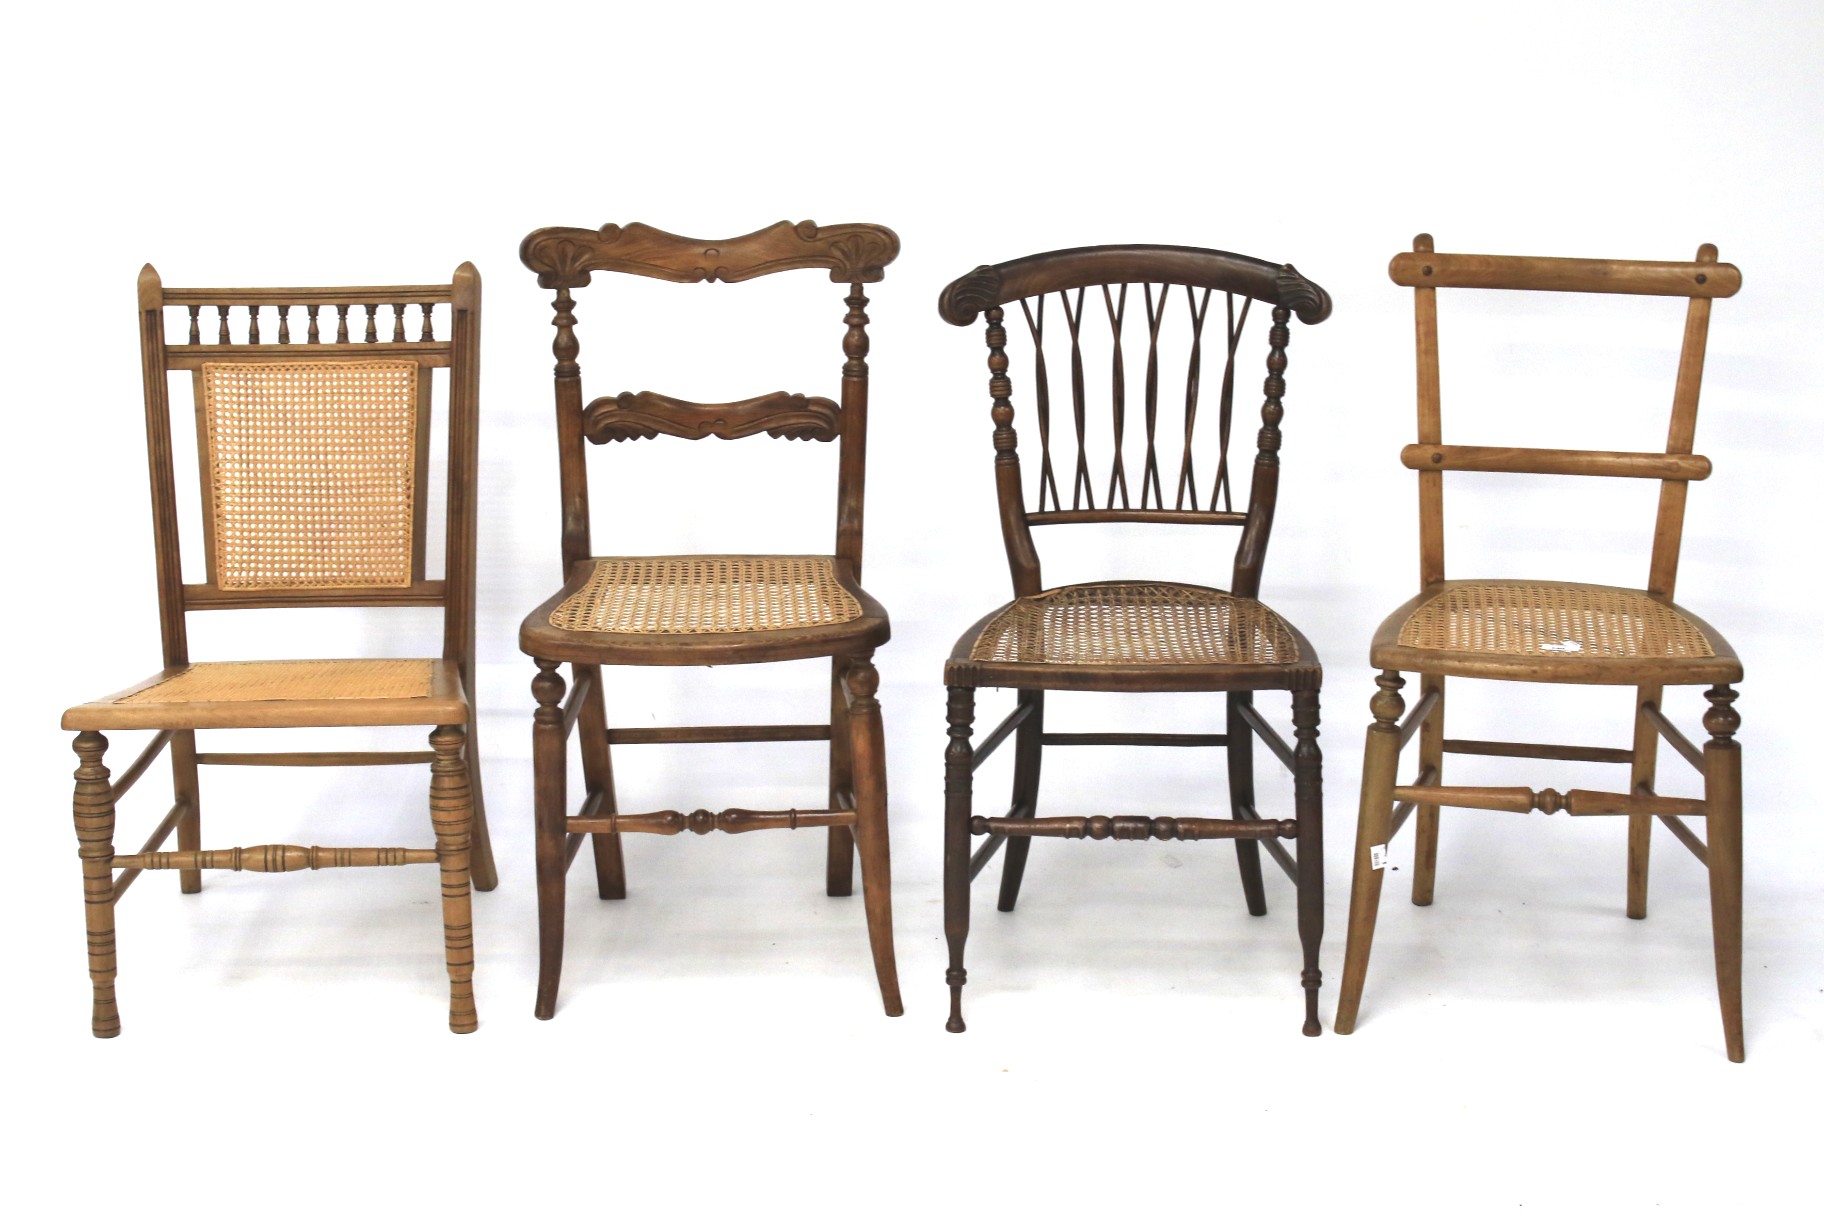 Four 19th & 20th century chairs.